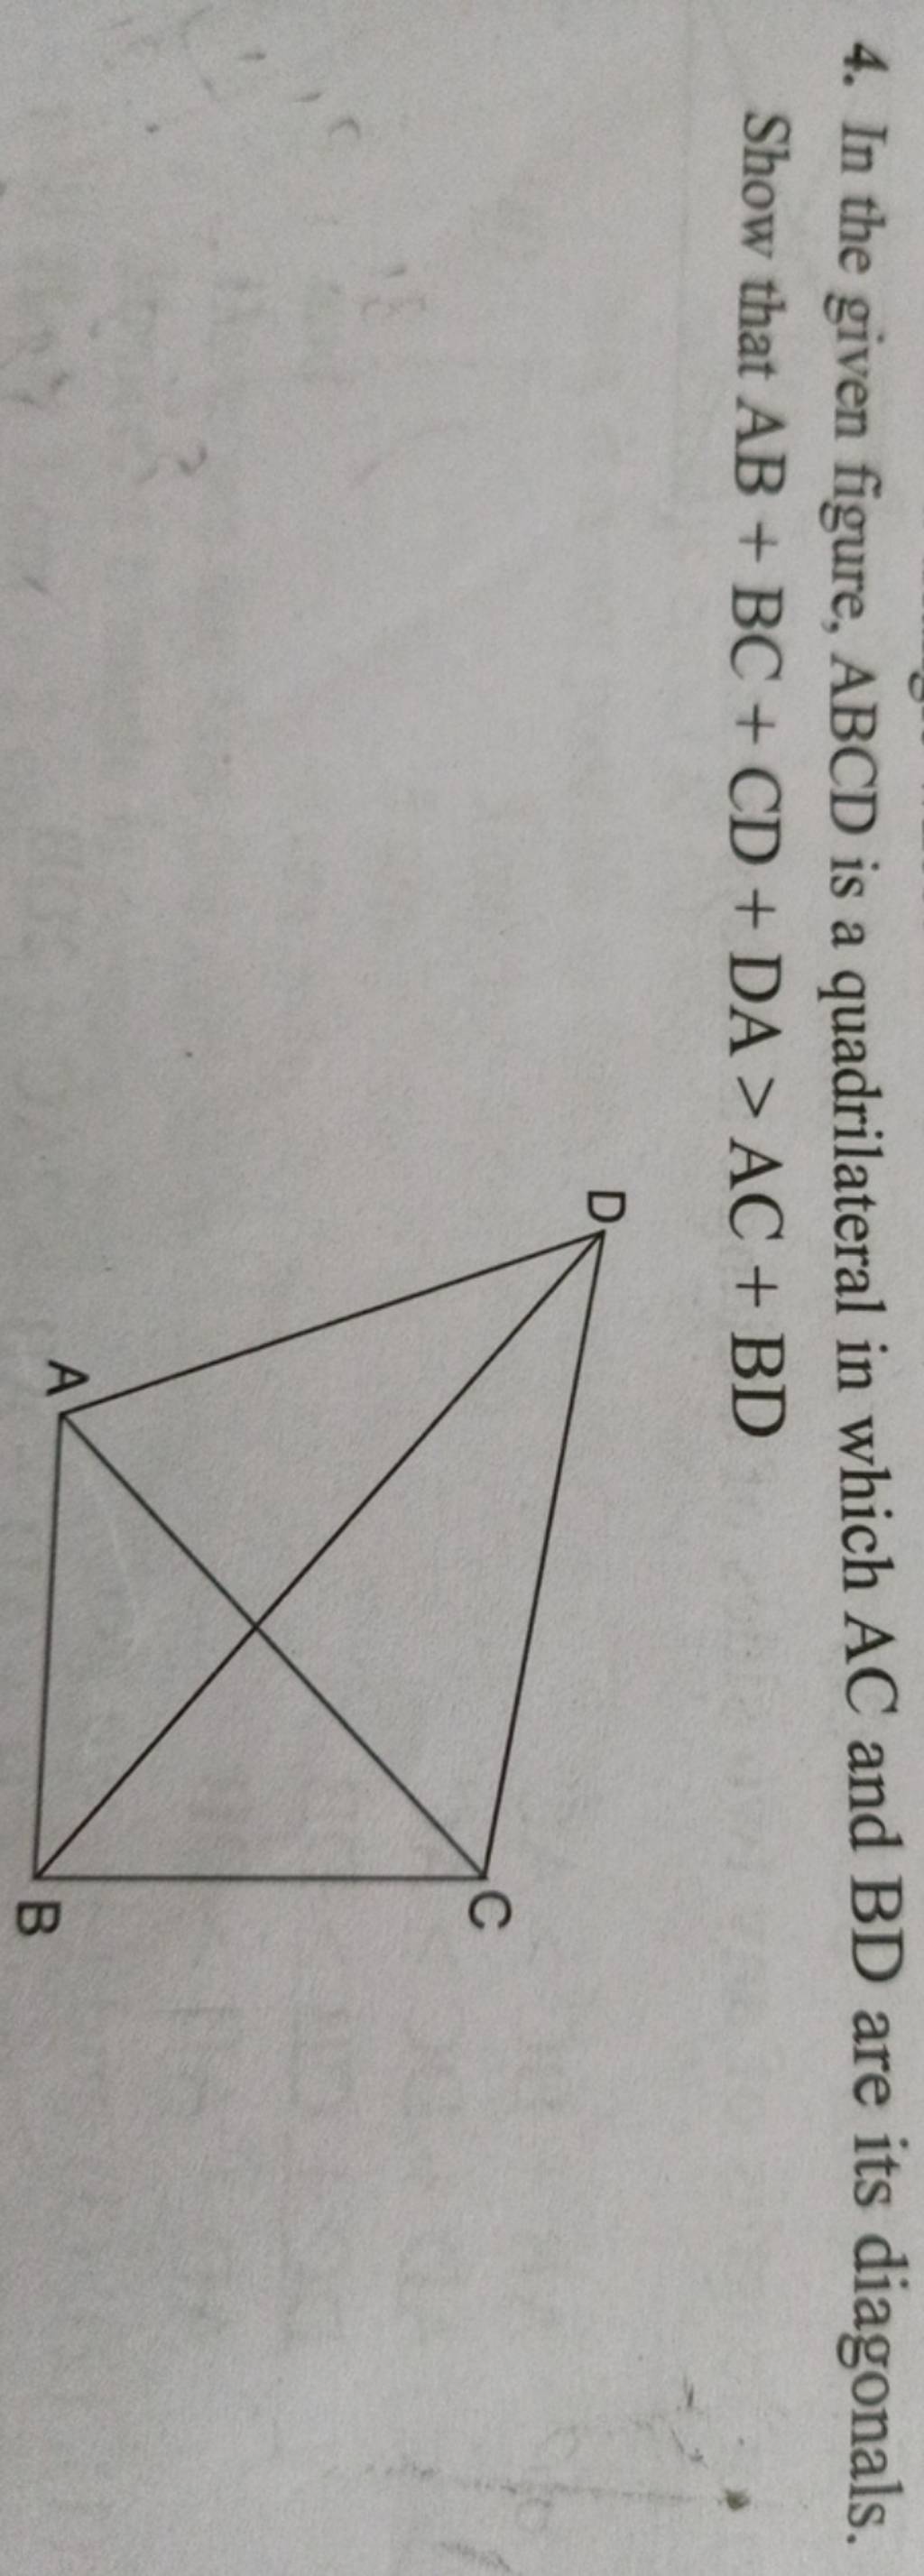 4 In The Given Figure Abcd Is A Quadrilateral In Which Ac And Bd Are It 6059